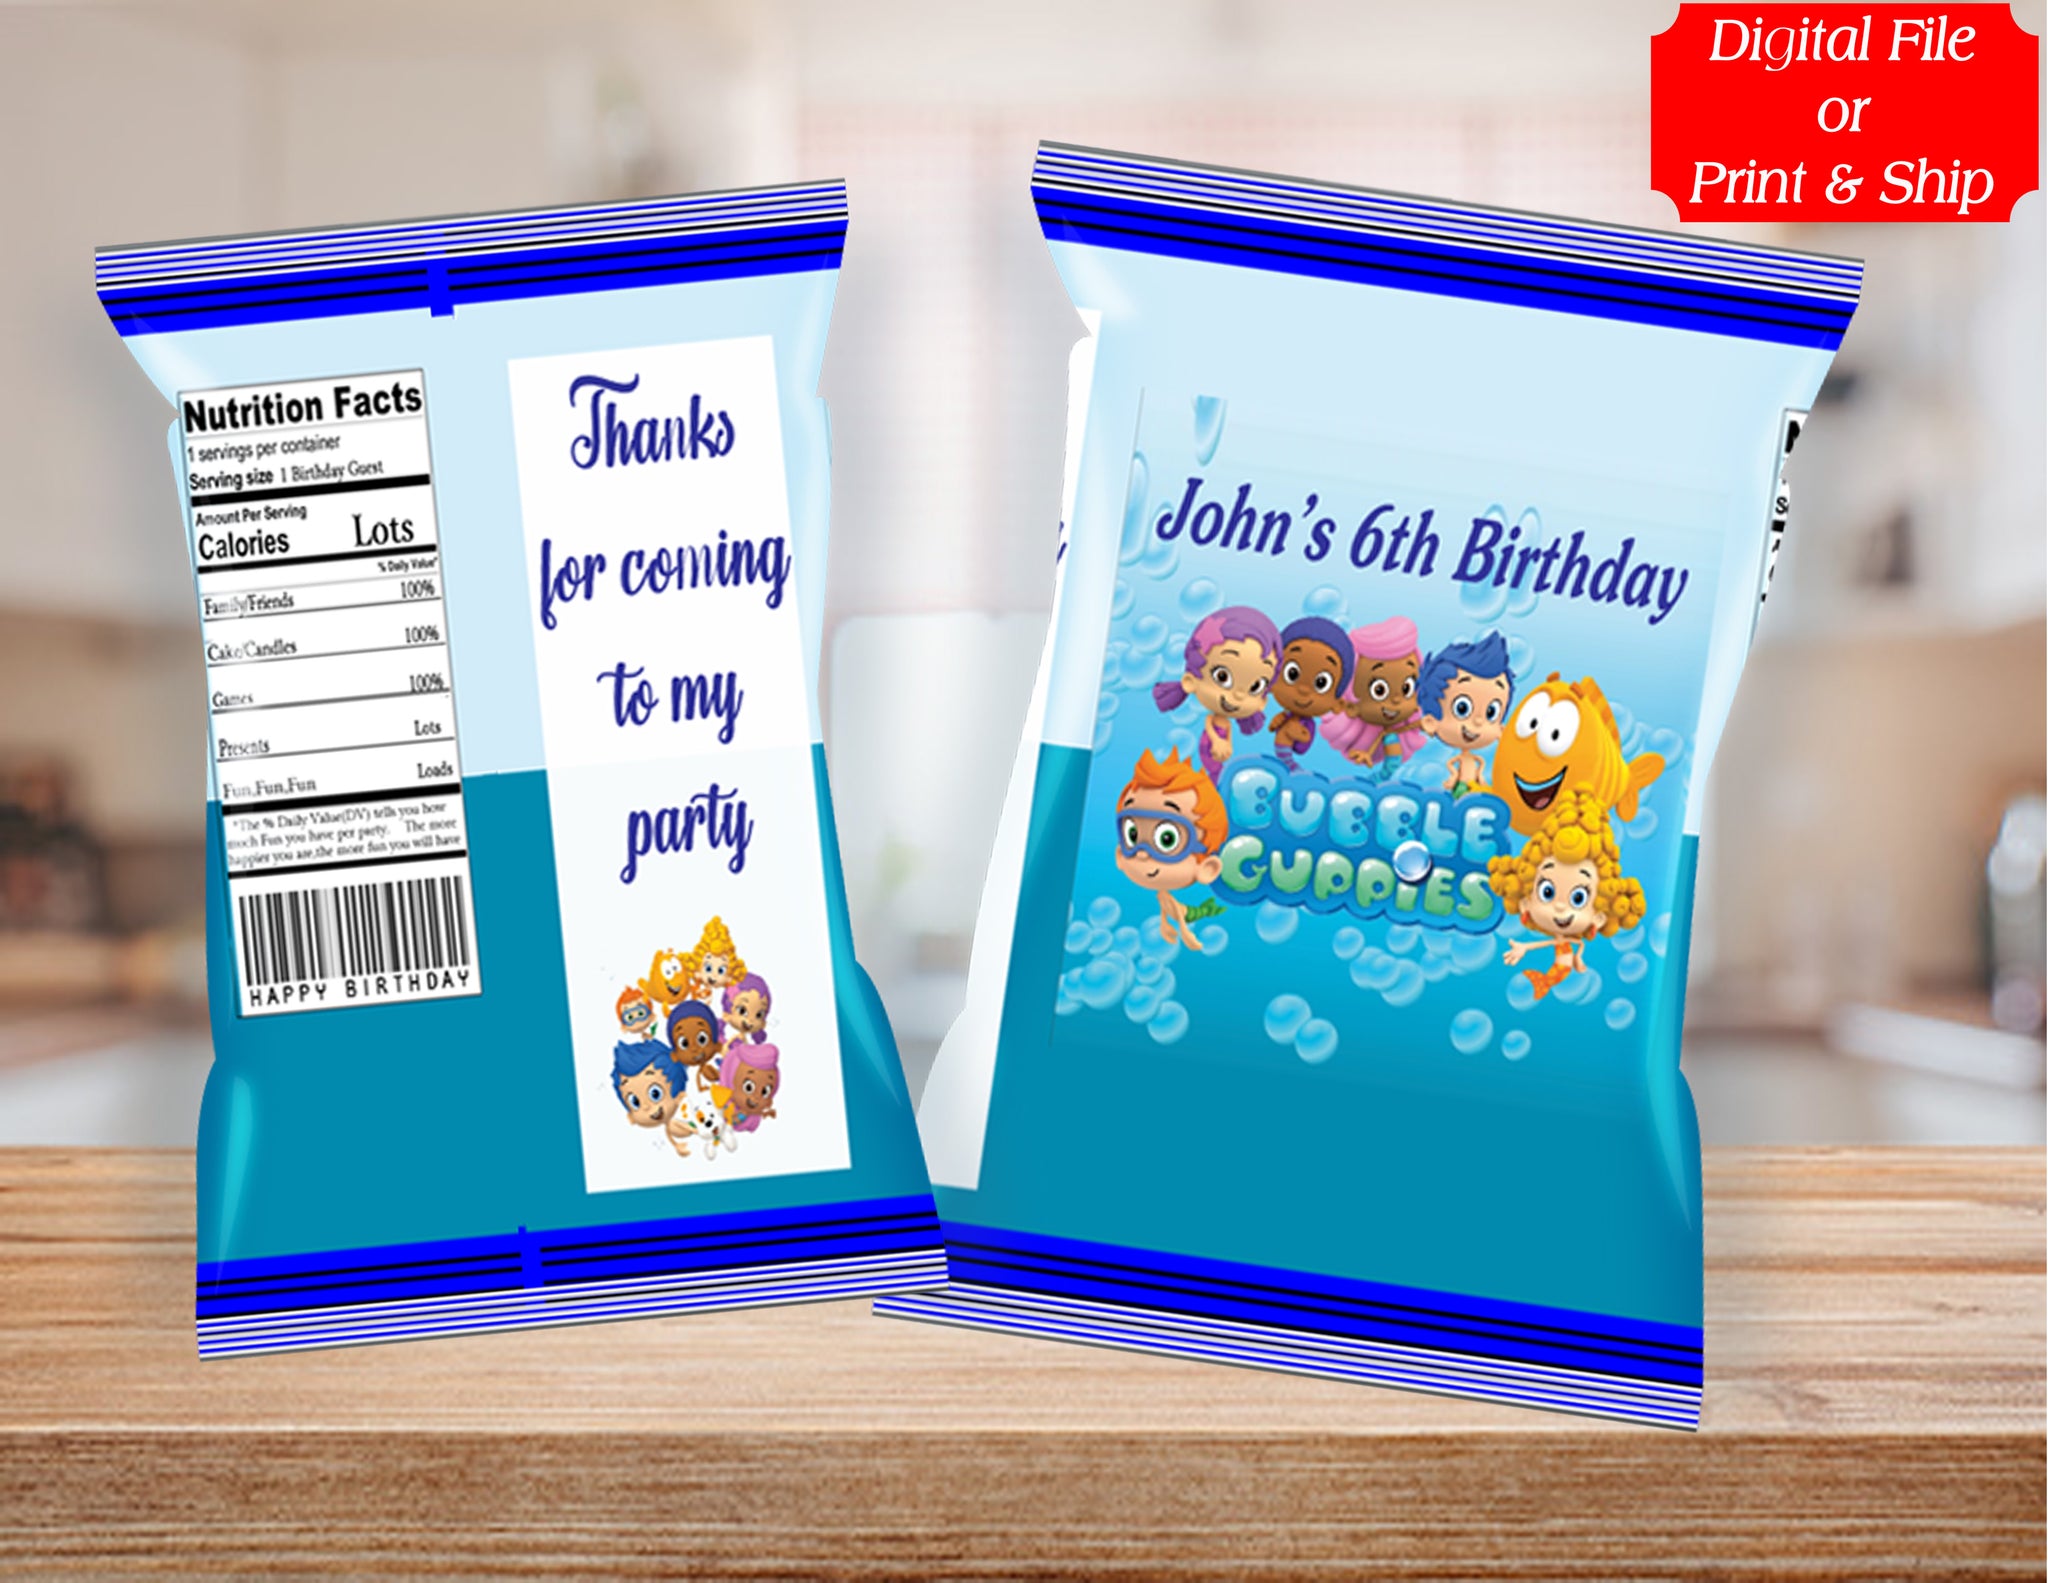 (12) Personalized BUBBLE GUPPIES Chip Candy Treat Bags Party Favors Printed or D. File